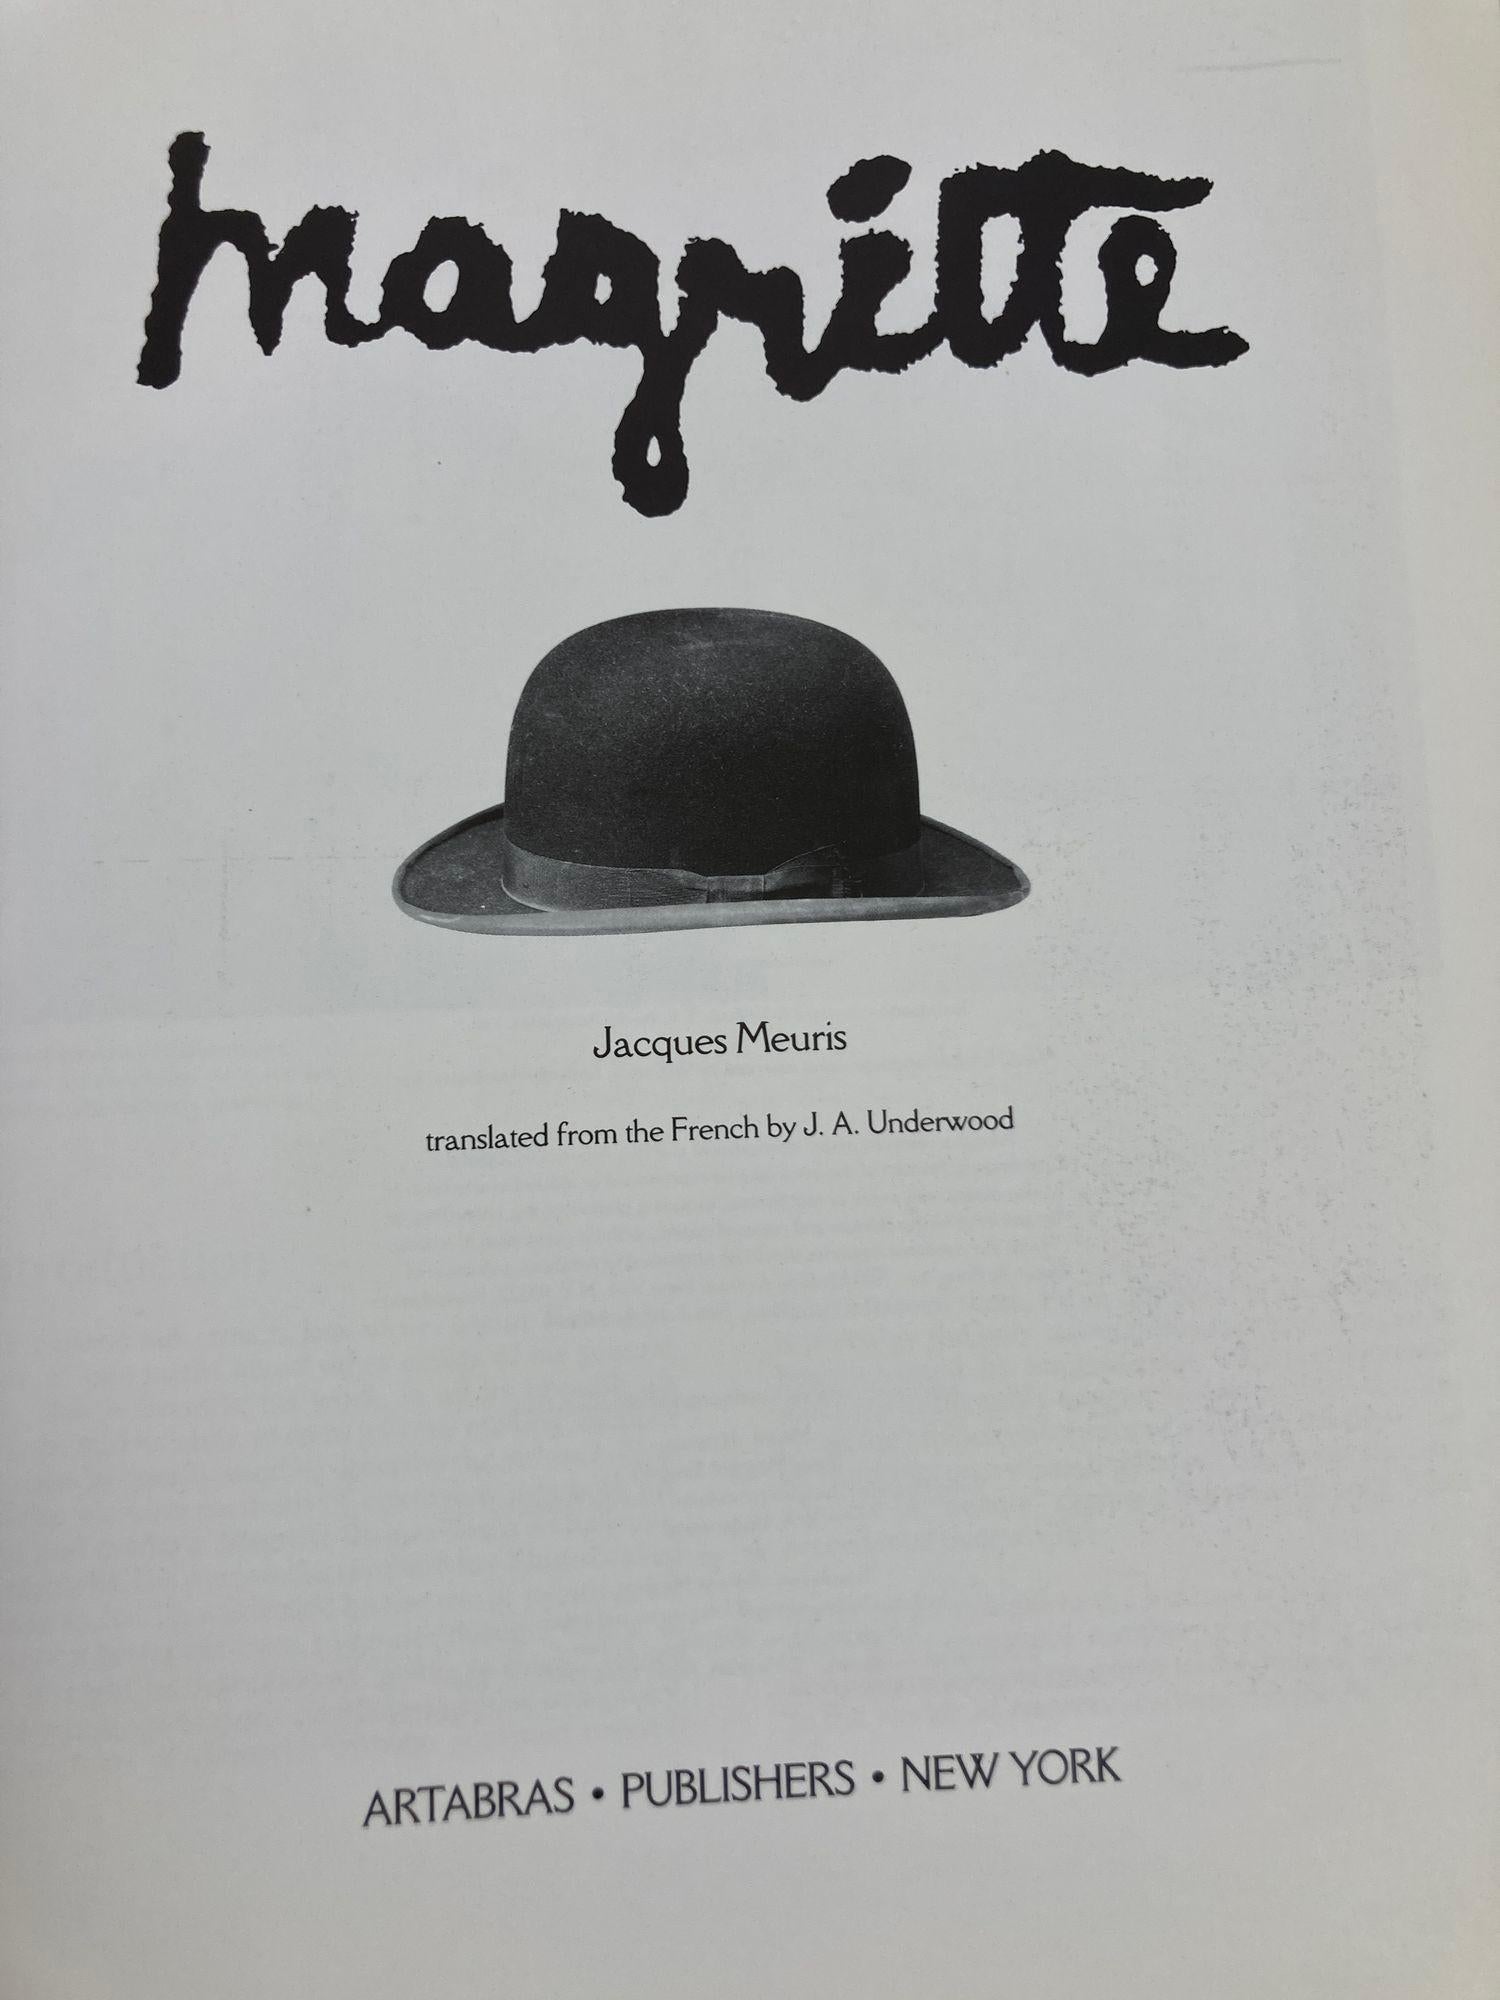 Modern Magritte by Jacques Meuris 1988 1st Edition Hardcover Art Book For Sale